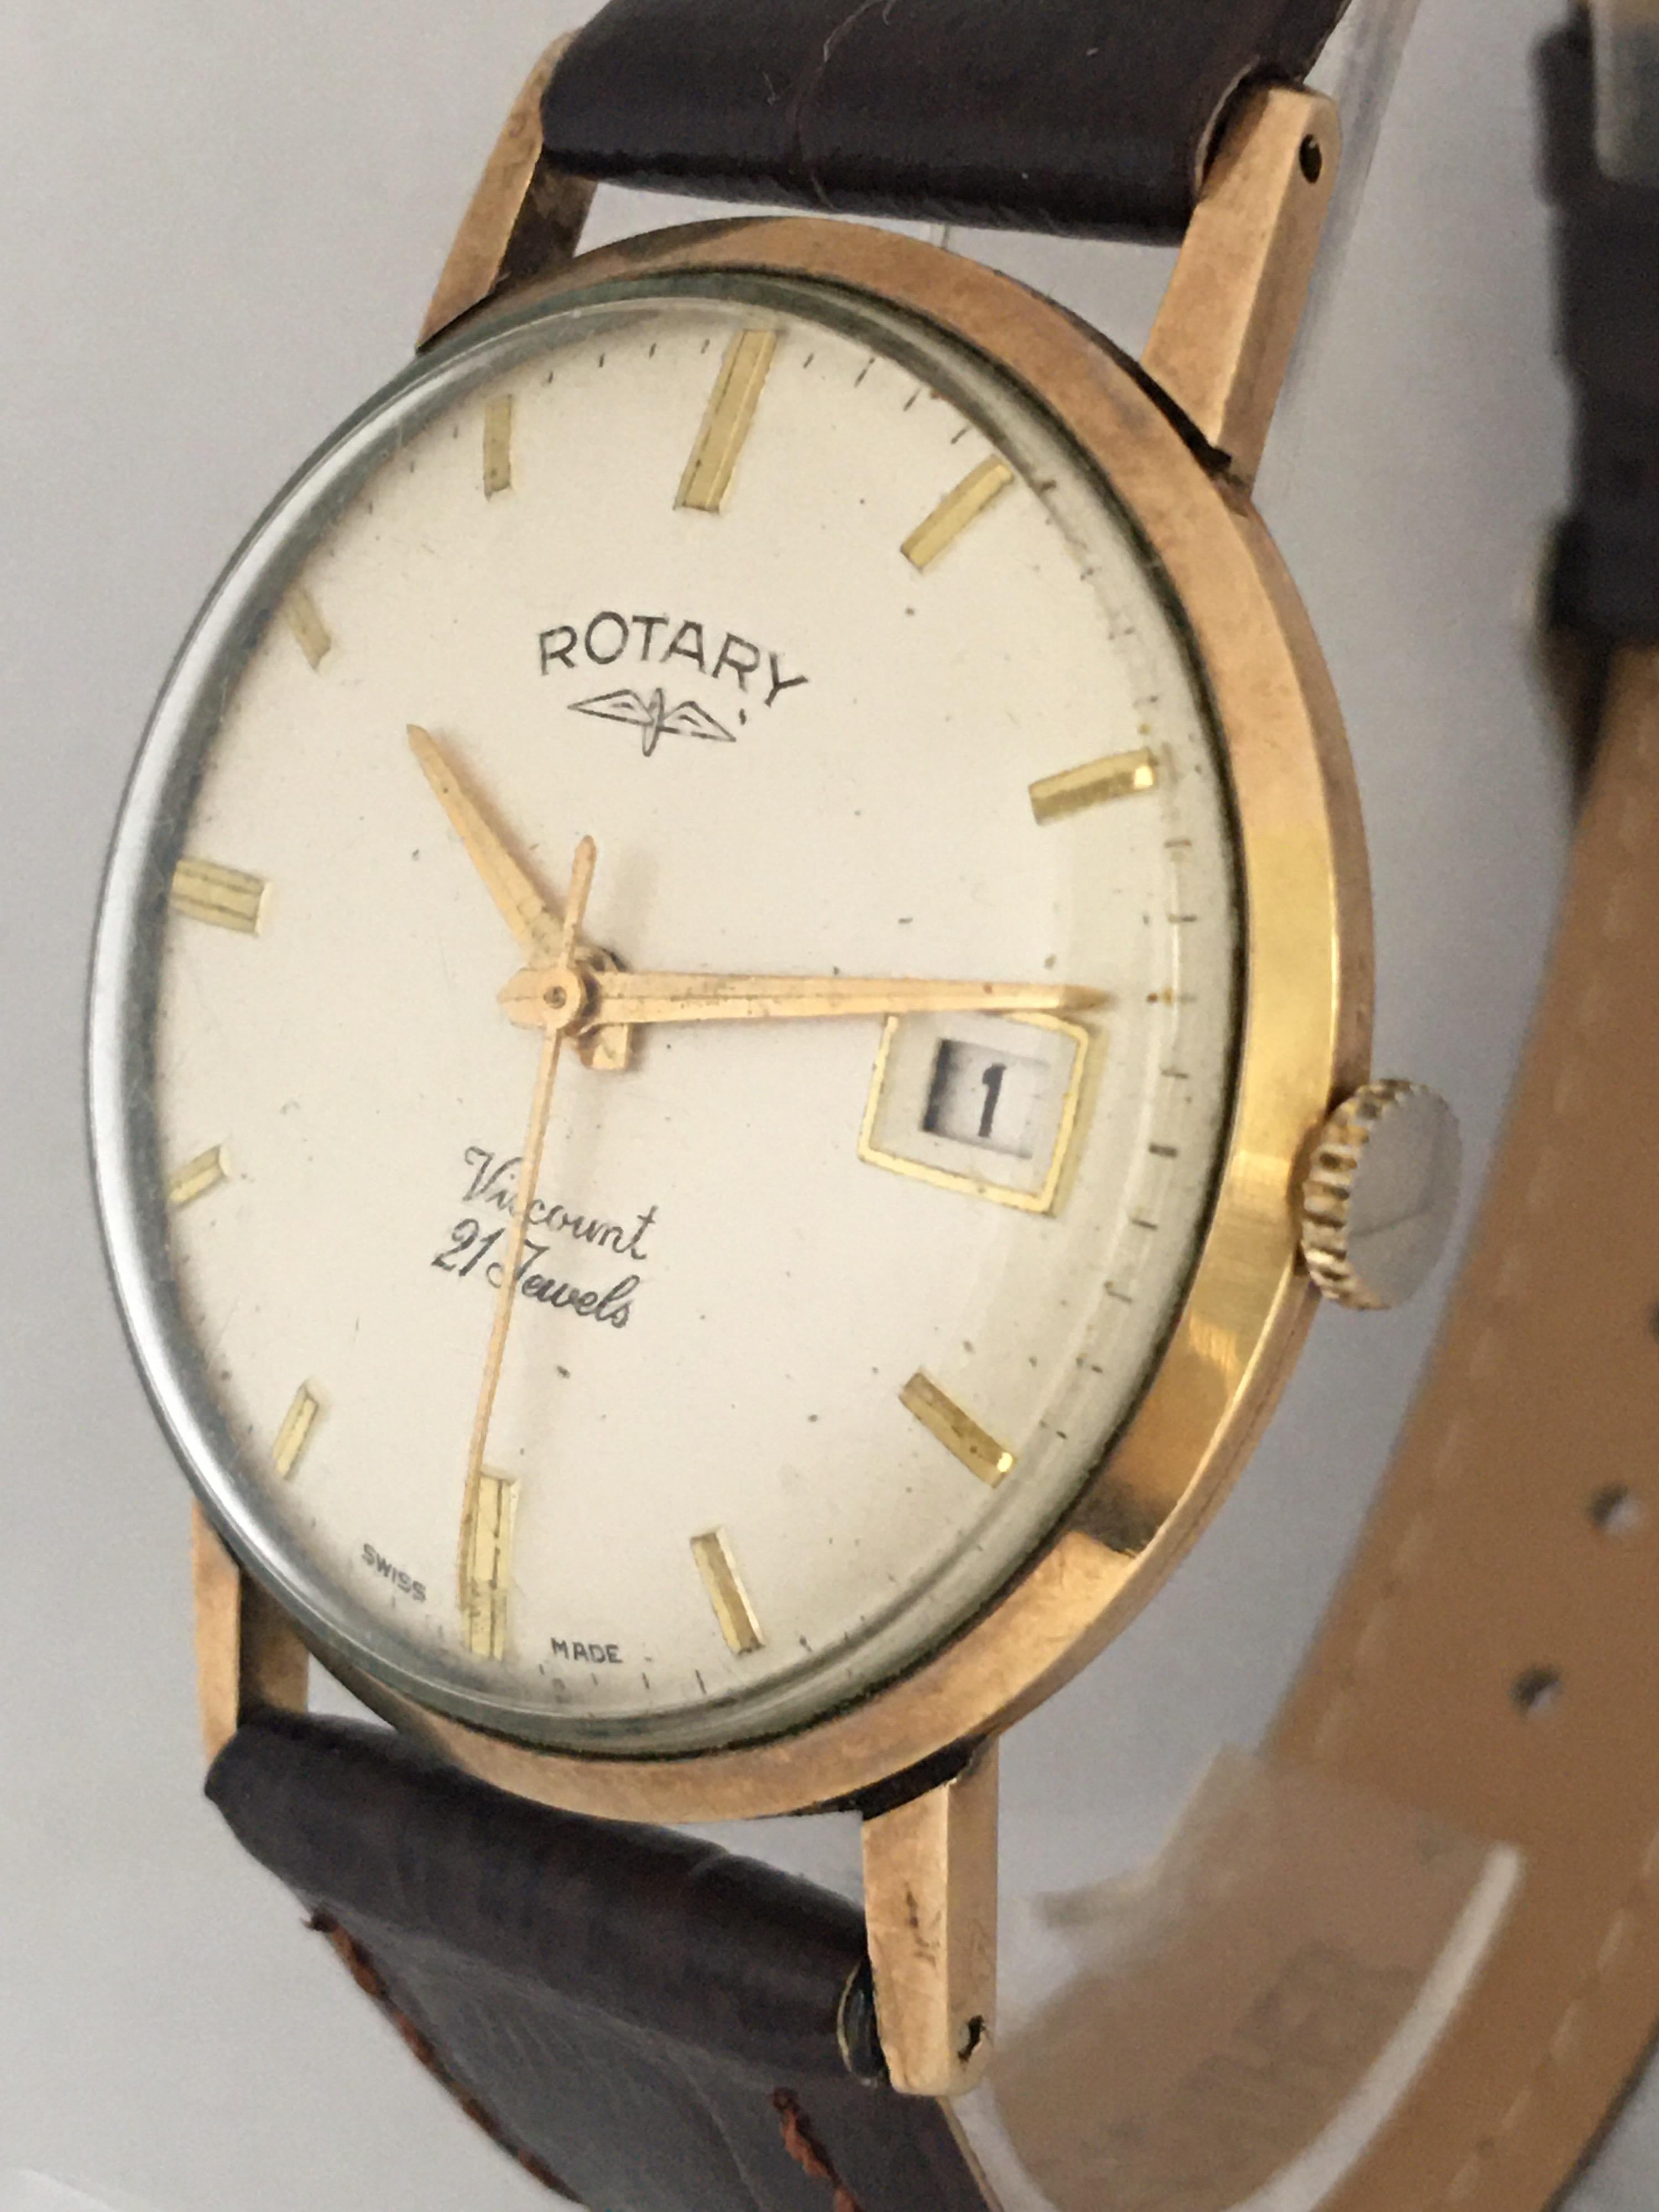 This beautiful vintage hand winding gold watch is in good working condition. It recently been serviced and it is running well. Visible signs of ageing and wear with light scratches on the gold watch case as shown. It’s been fitted with a new brown